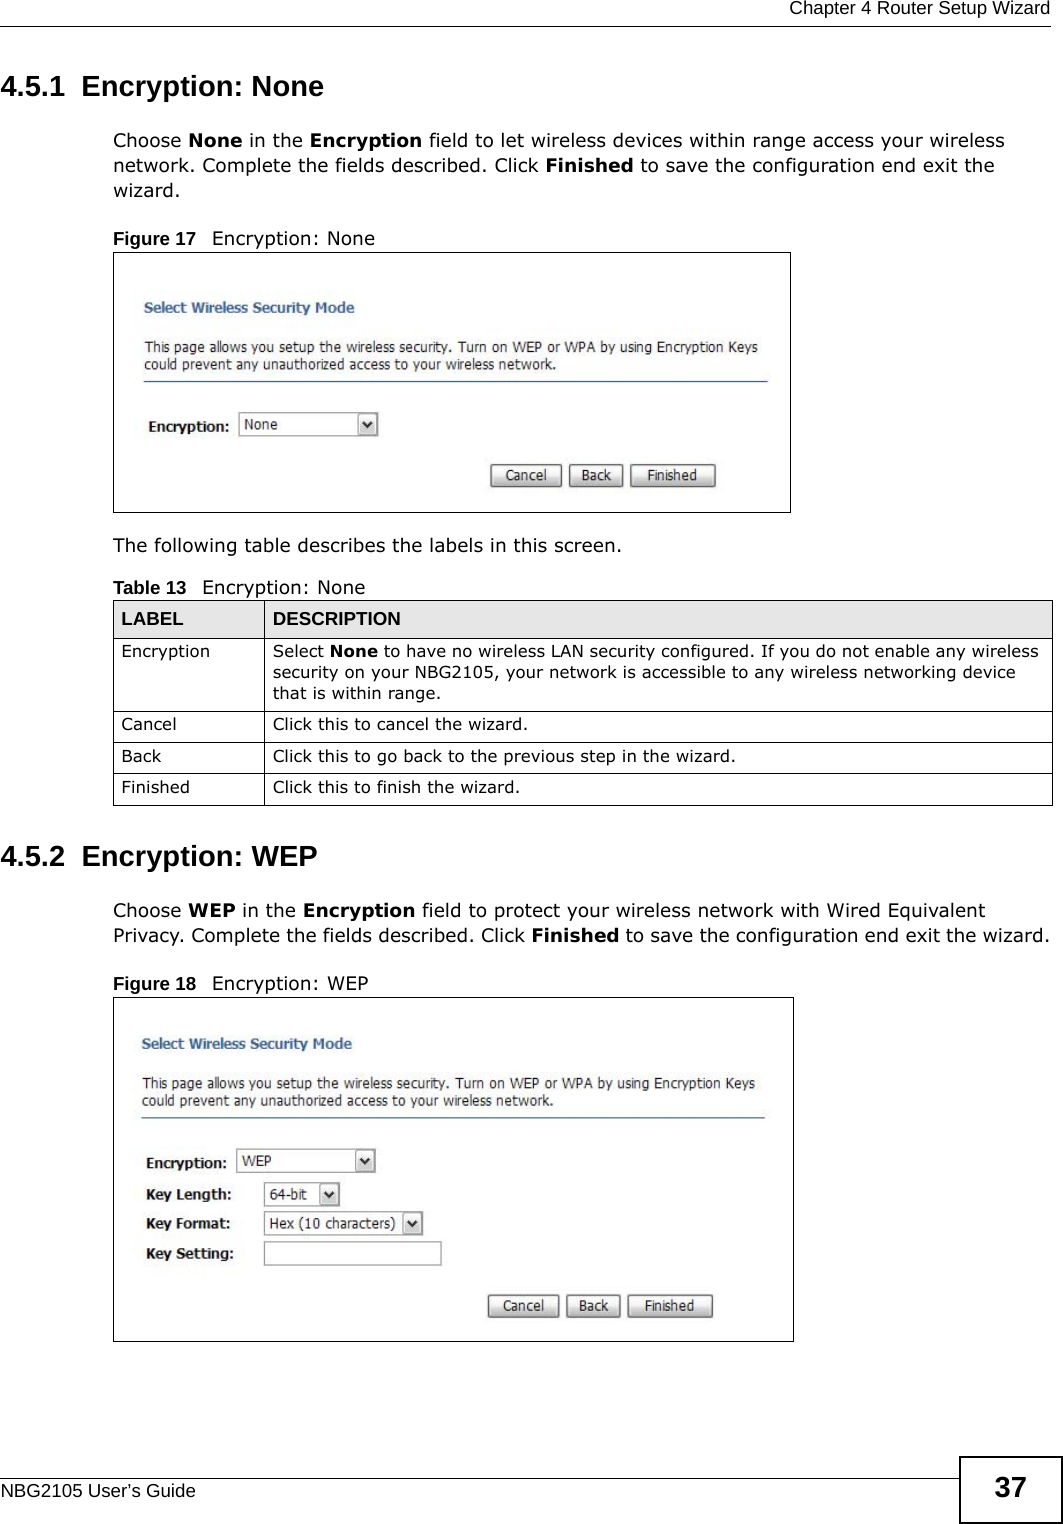  Chapter 4 Router Setup WizardNBG2105 User’s Guide 374.5.1  Encryption: NoneChoose None in the Encryption field to let wireless devices within range access your wireless network. Complete the fields described. Click Finished to save the configuration end exit the wizard.Figure 17   Encryption: None The following table describes the labels in this screen.4.5.2  Encryption: WEPChoose WEP in the Encryption field to protect your wireless network with Wired Equivalent Privacy. Complete the fields described. Click Finished to save the configuration end exit the wizard.Figure 18   Encryption: WEP Table 13   Encryption: NoneLABEL DESCRIPTIONEncryption Select None to have no wireless LAN security configured. If you do not enable any wireless security on your NBG2105, your network is accessible to any wireless networking device that is within range. Cancel Click this to cancel the wizard.Back Click this to go back to the previous step in the wizard.Finished Click this to finish the wizard.